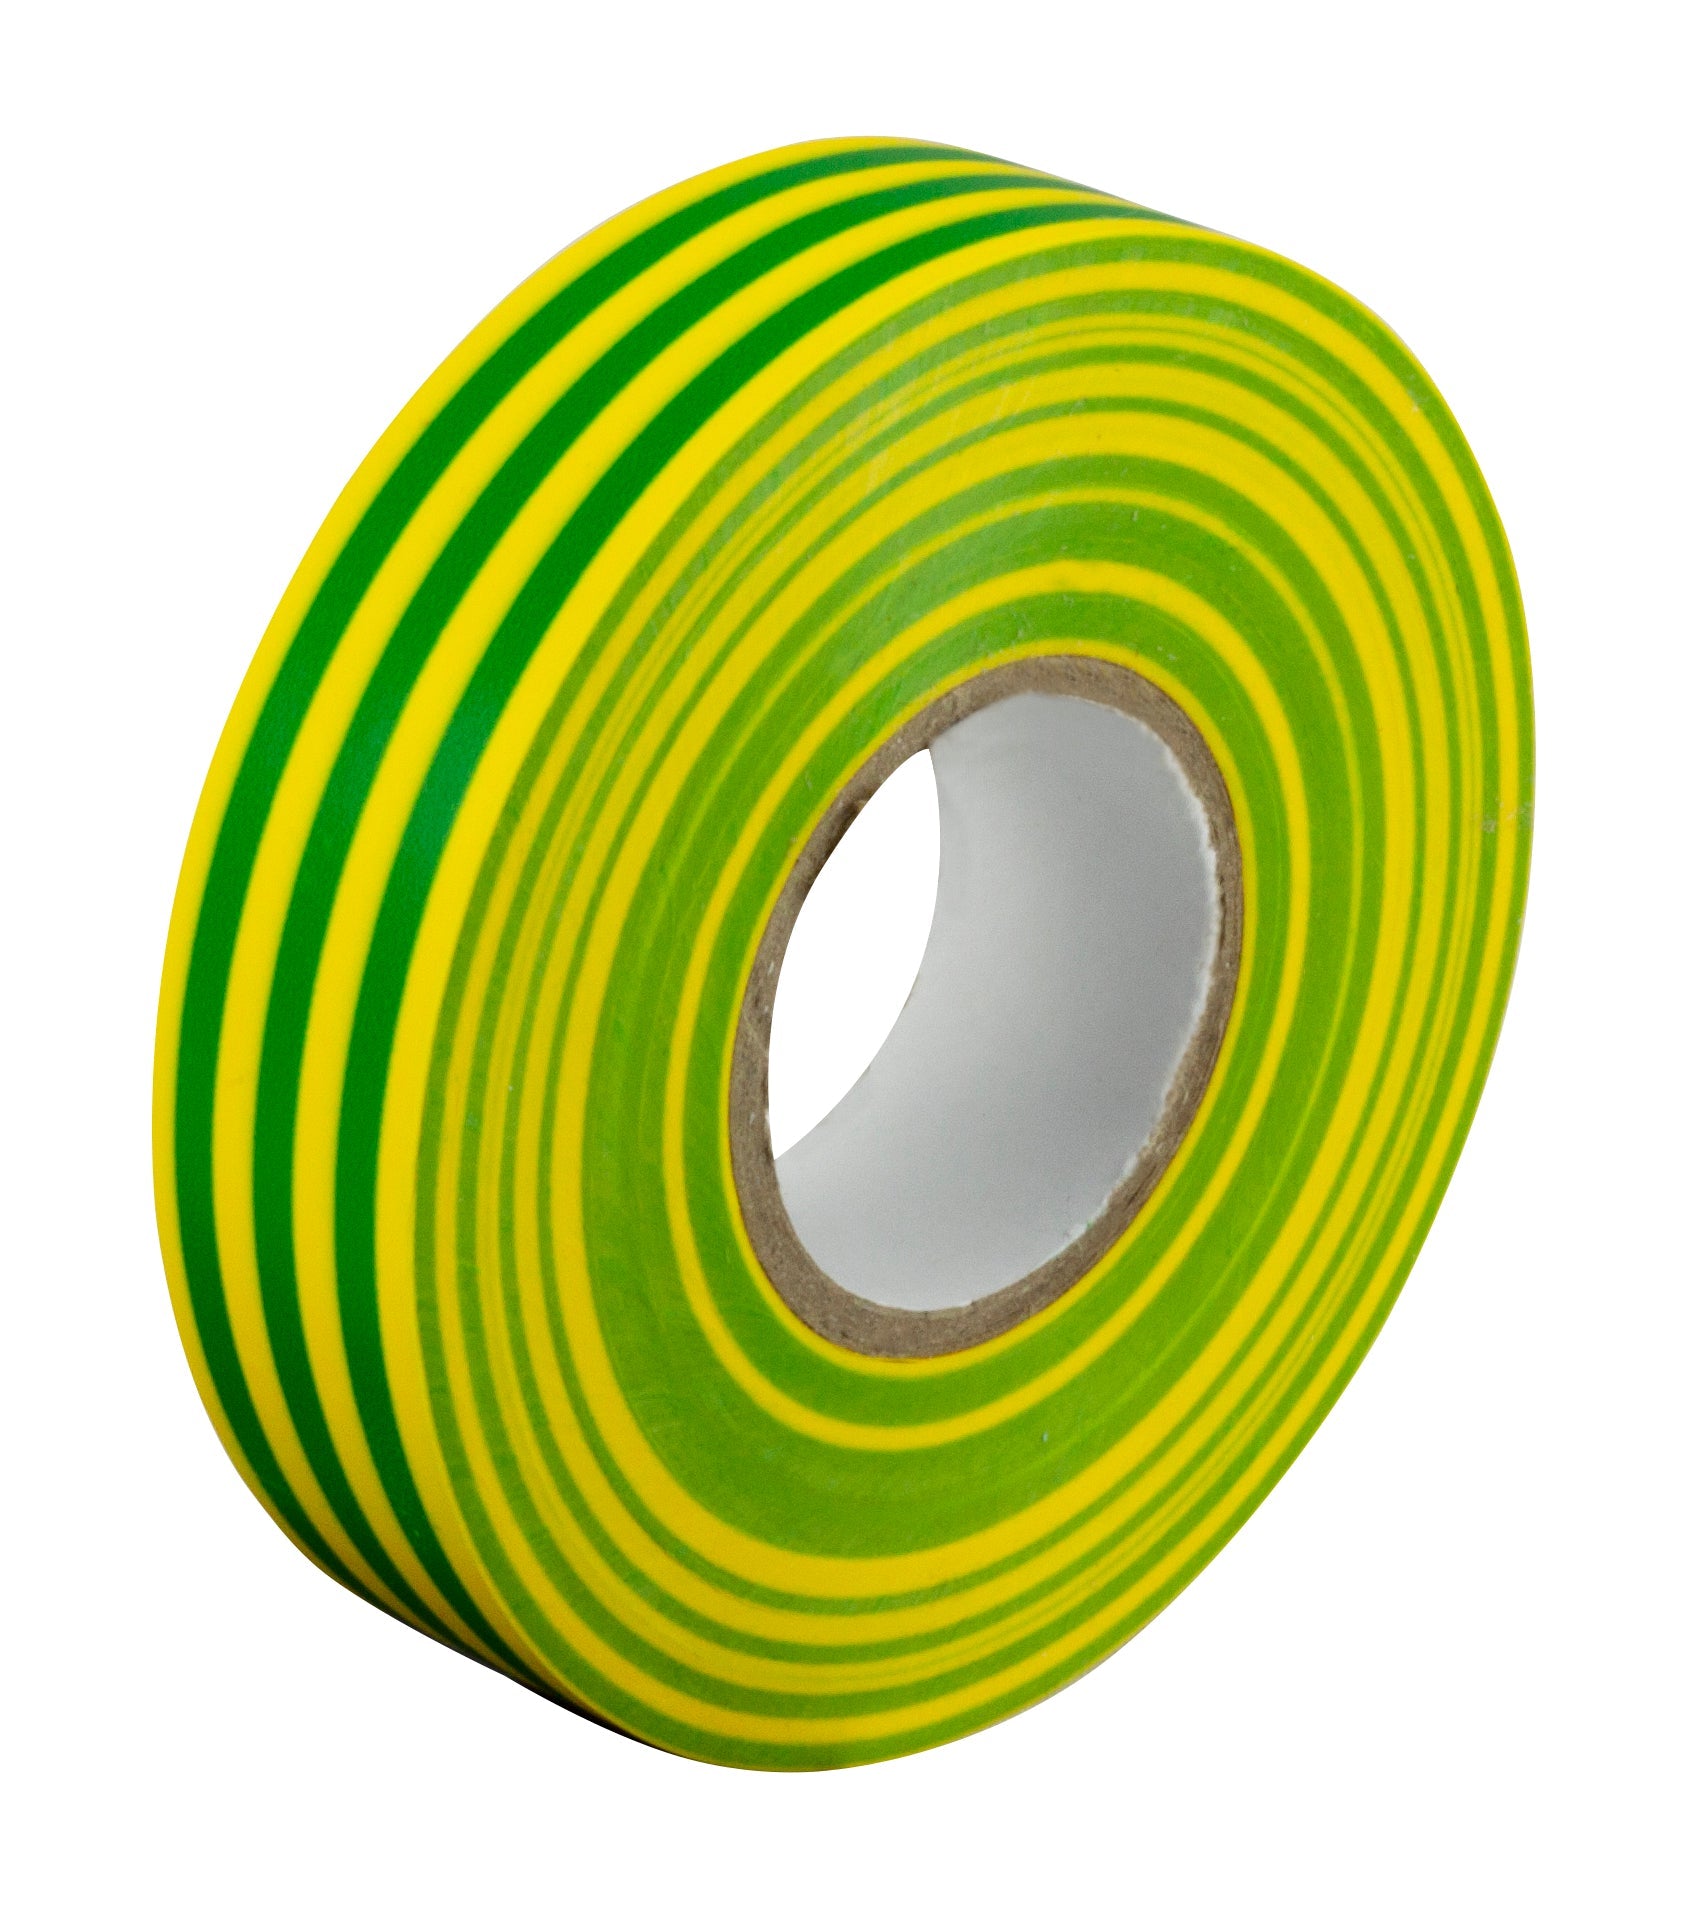 PVC Tape Size: 19mmx33m Roll - Green/Yellow - Pack of 10